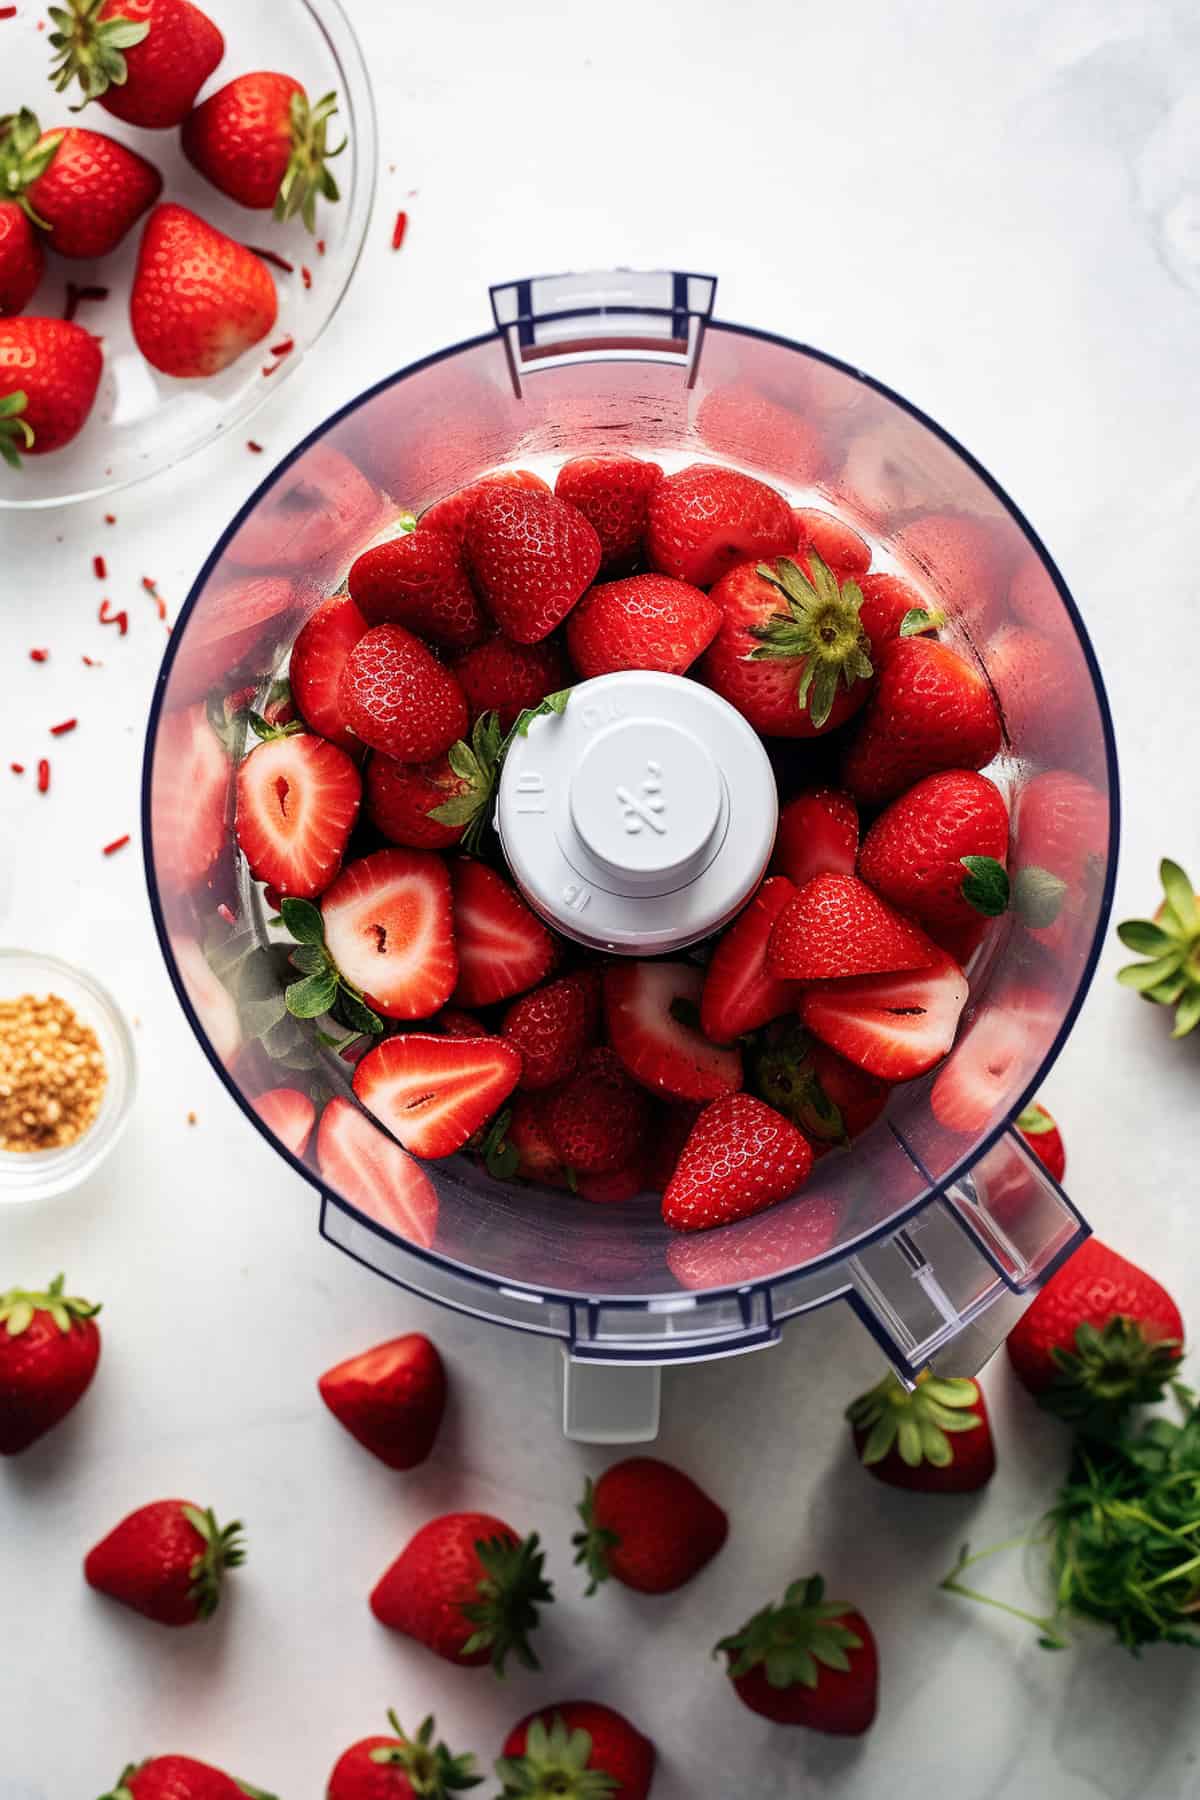 Strawberries in a food processor for cheesecake.